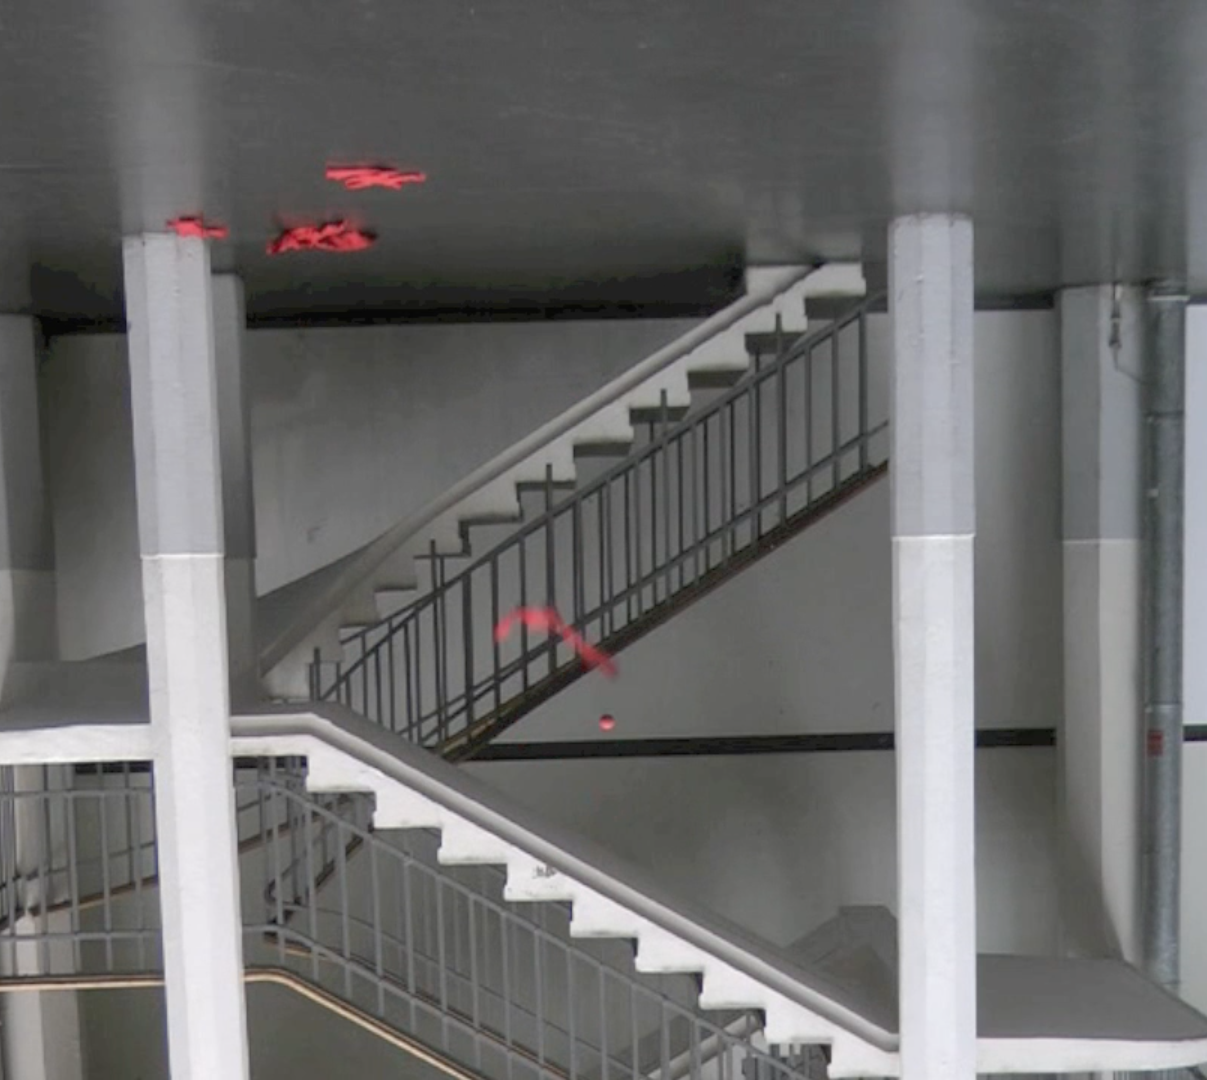 A staircase is pictured upside down and red fabric and a ball seam to fall upwards